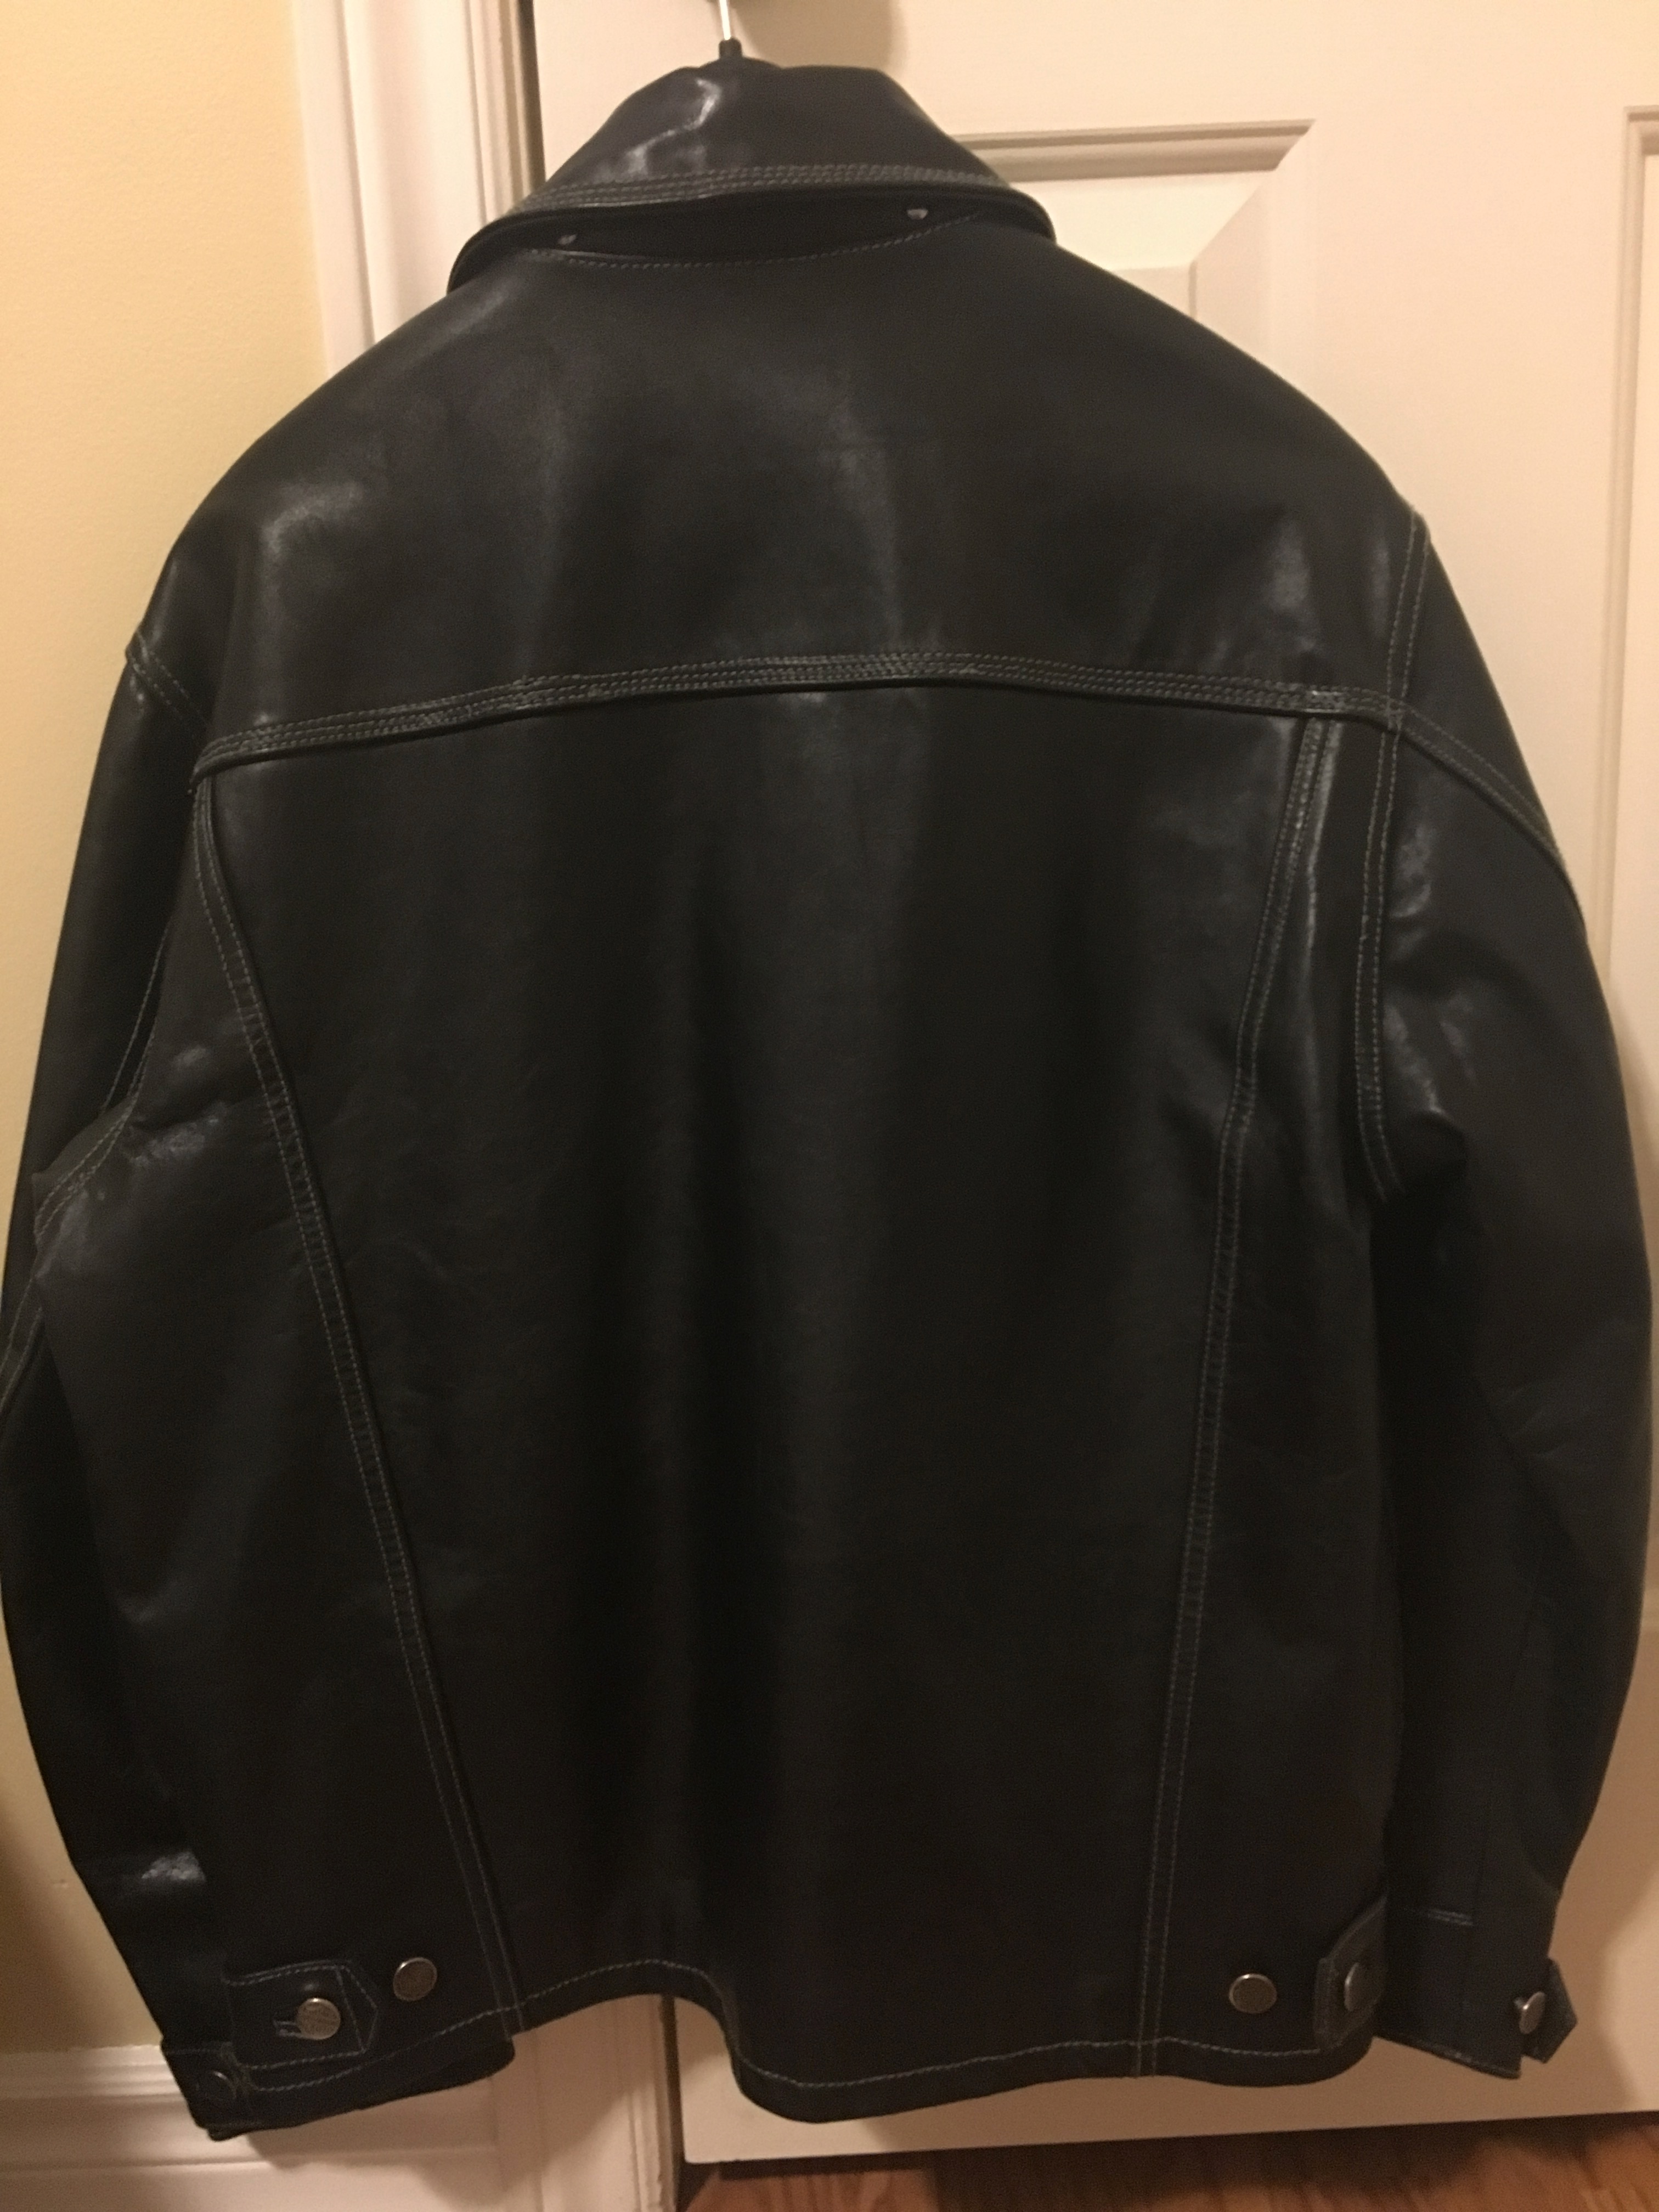 How Much Is My Harley Davidson Jacket Worth? Unlock Its Value!